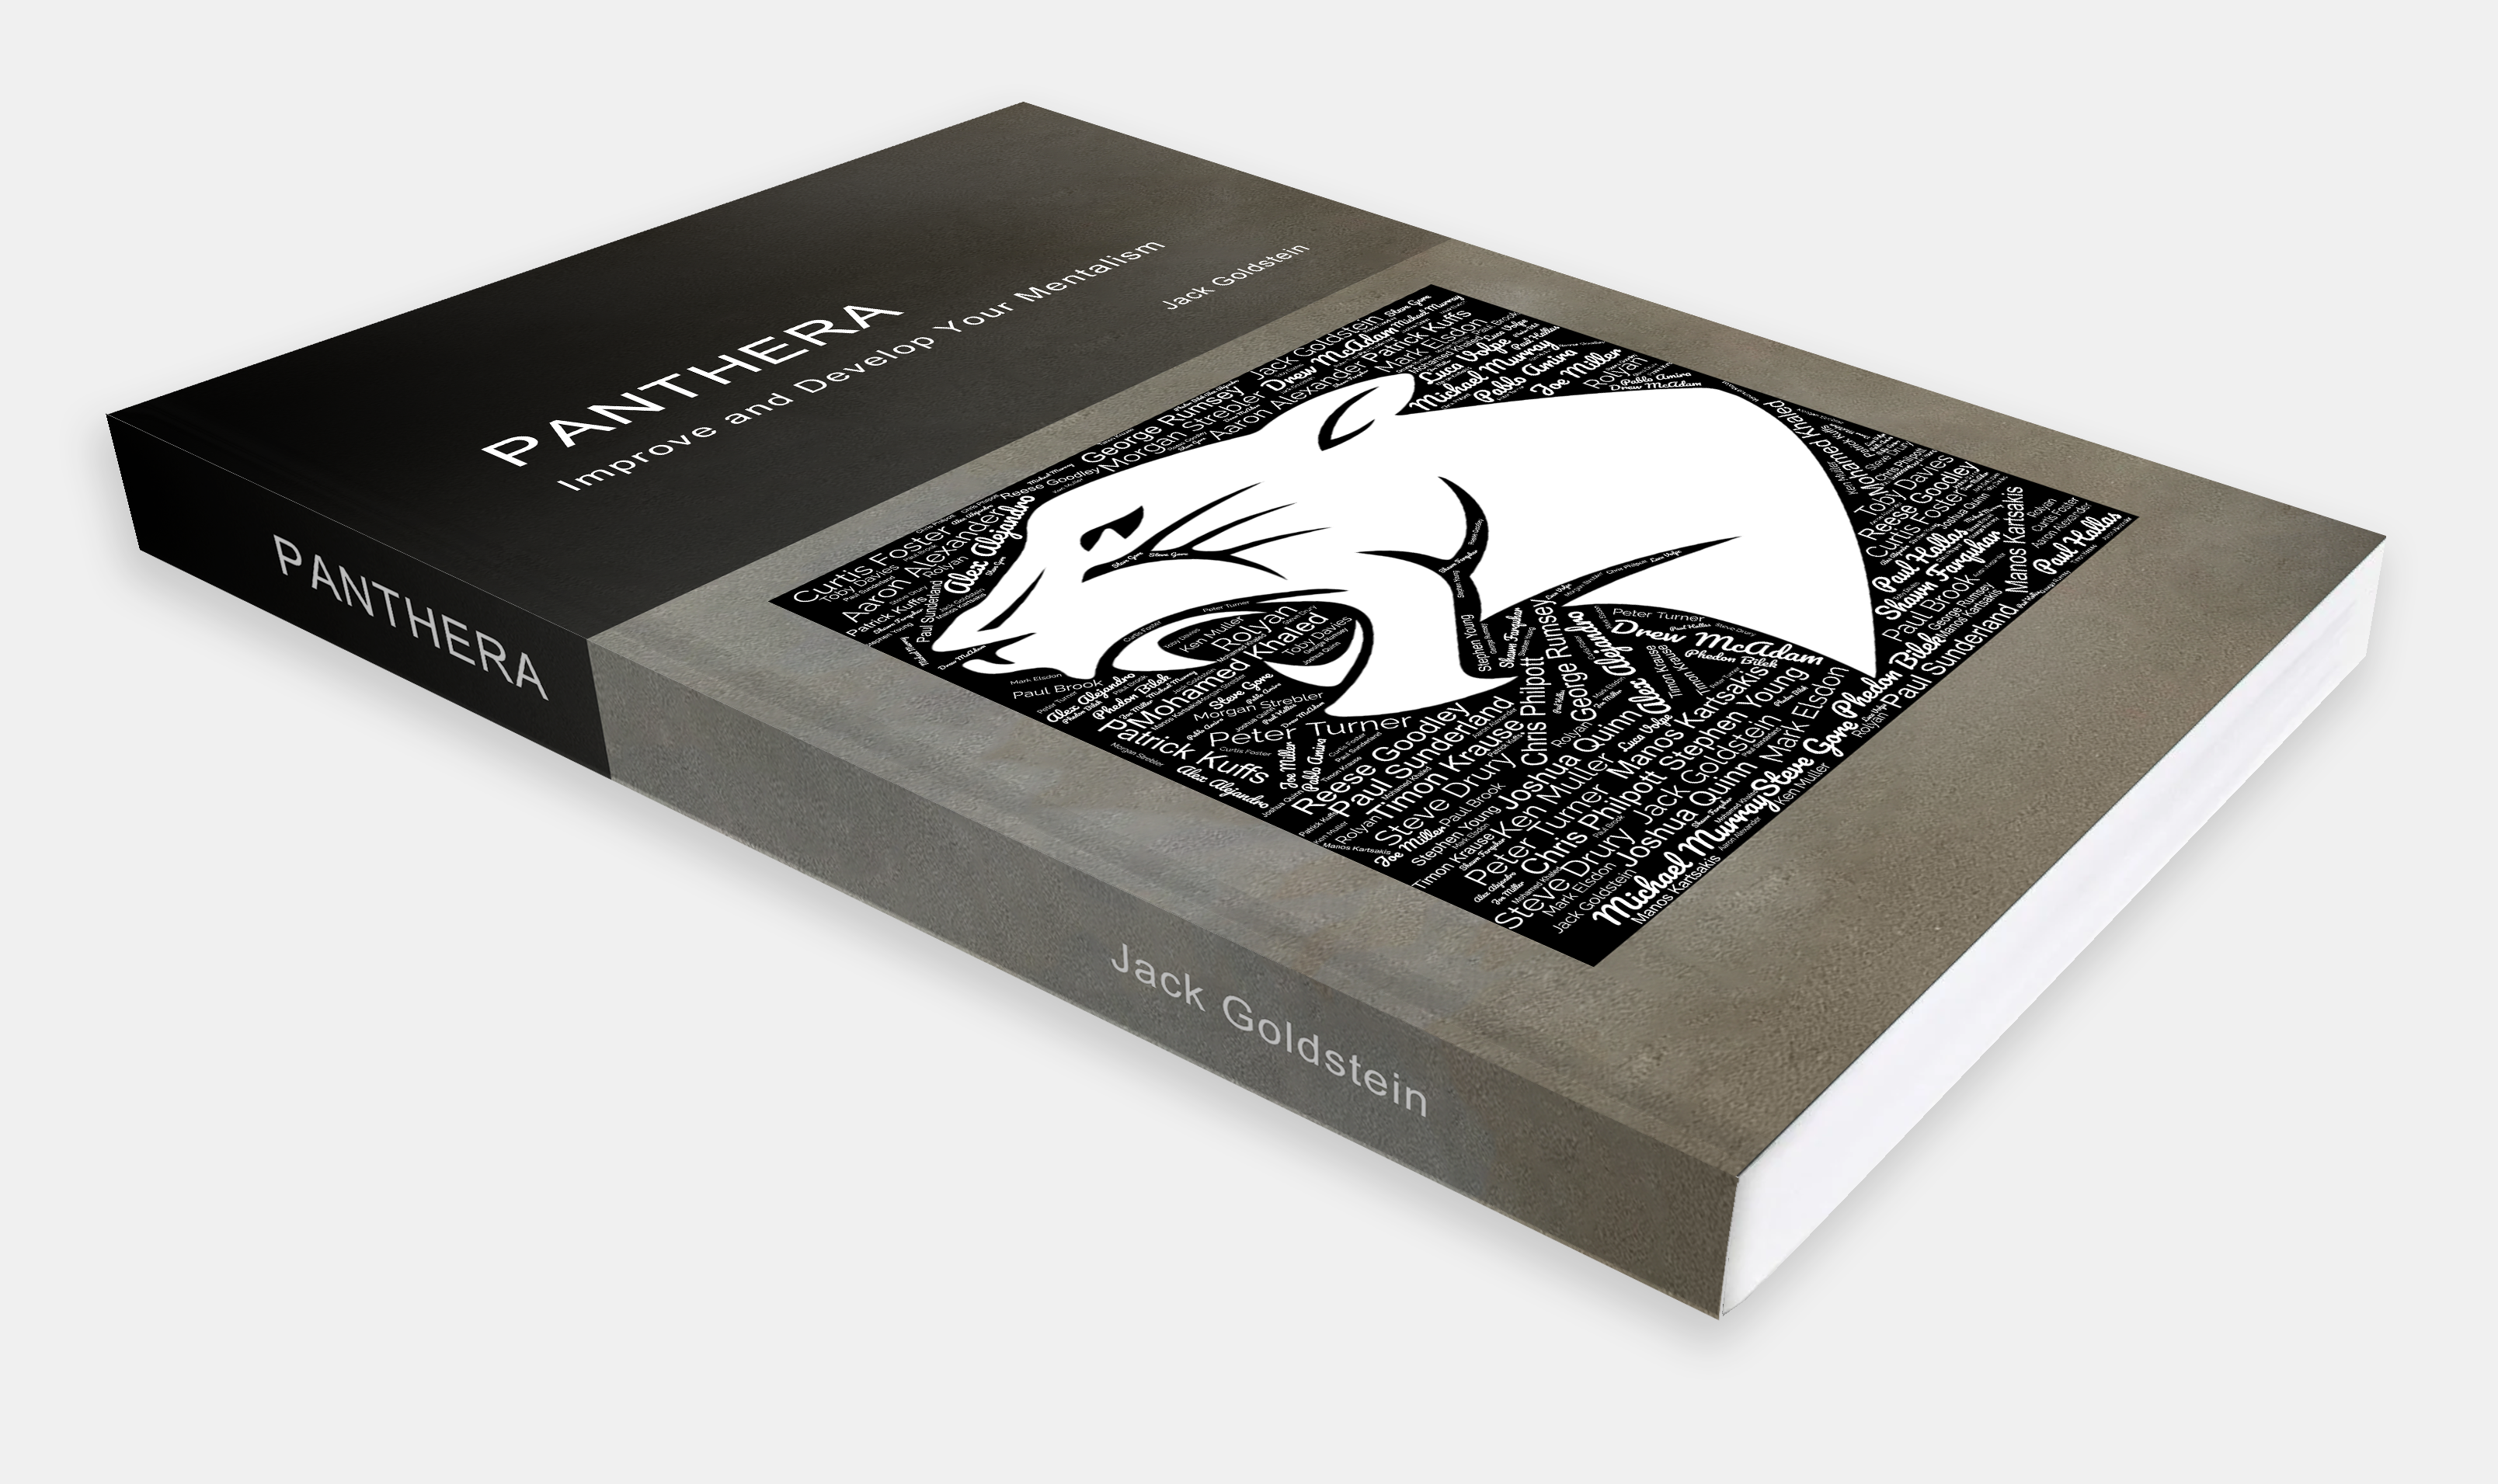 Panthera (Limited Edition 300 Copies) by Jack Goldstein – MindFX